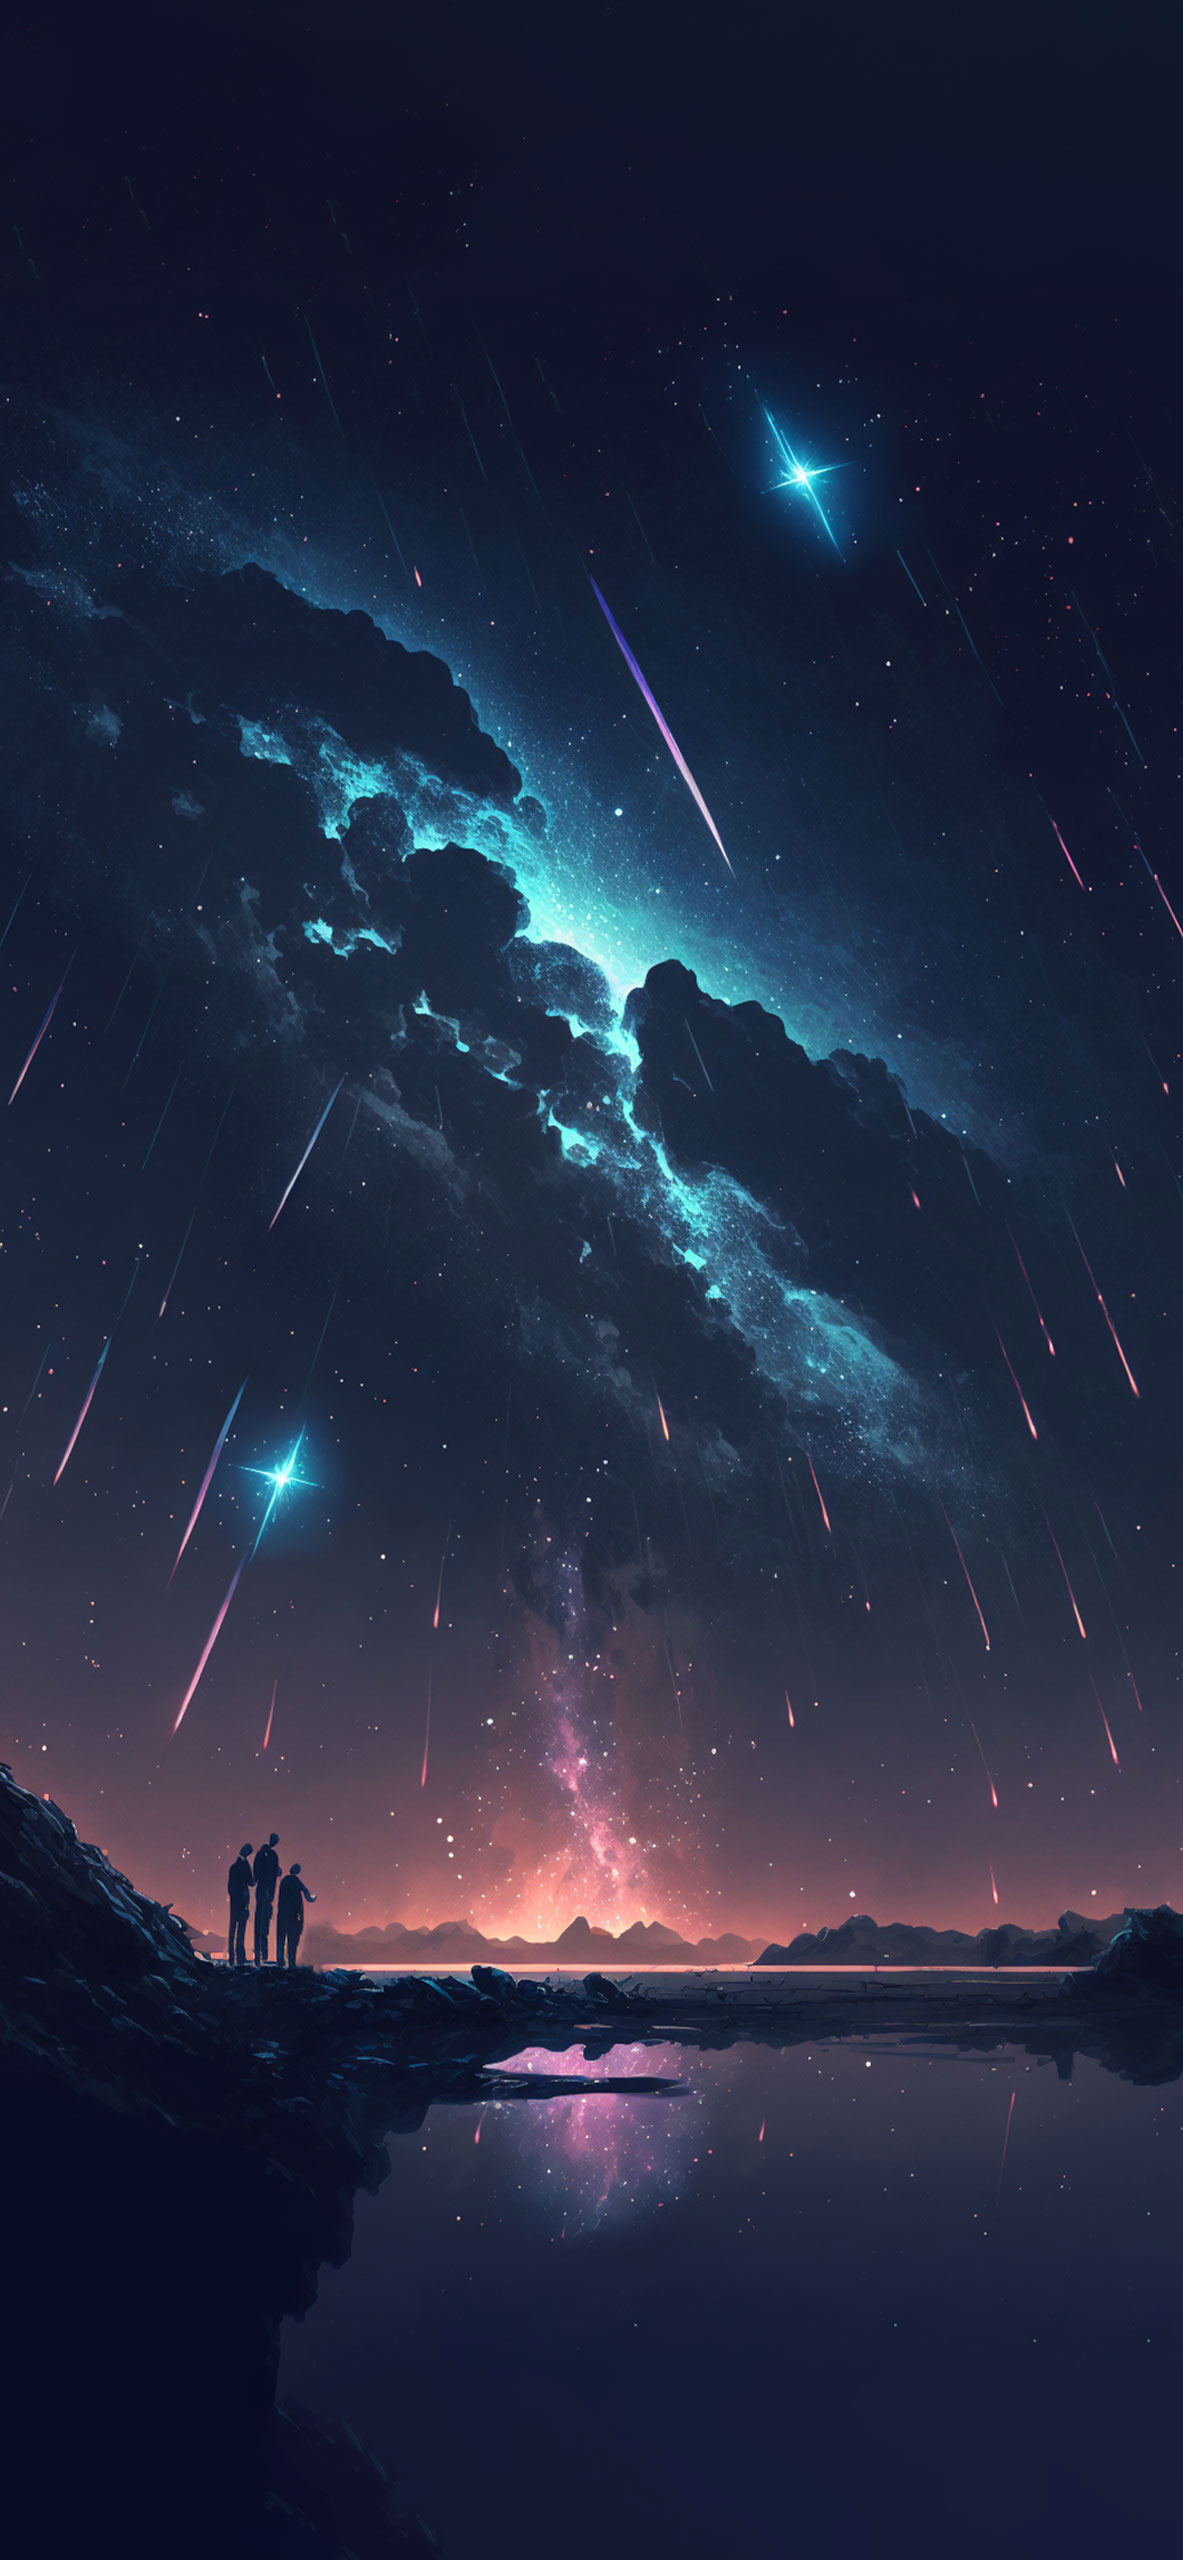 Starfalls in the Night Sky Wallpapers - Space Wallpaper for iPhone